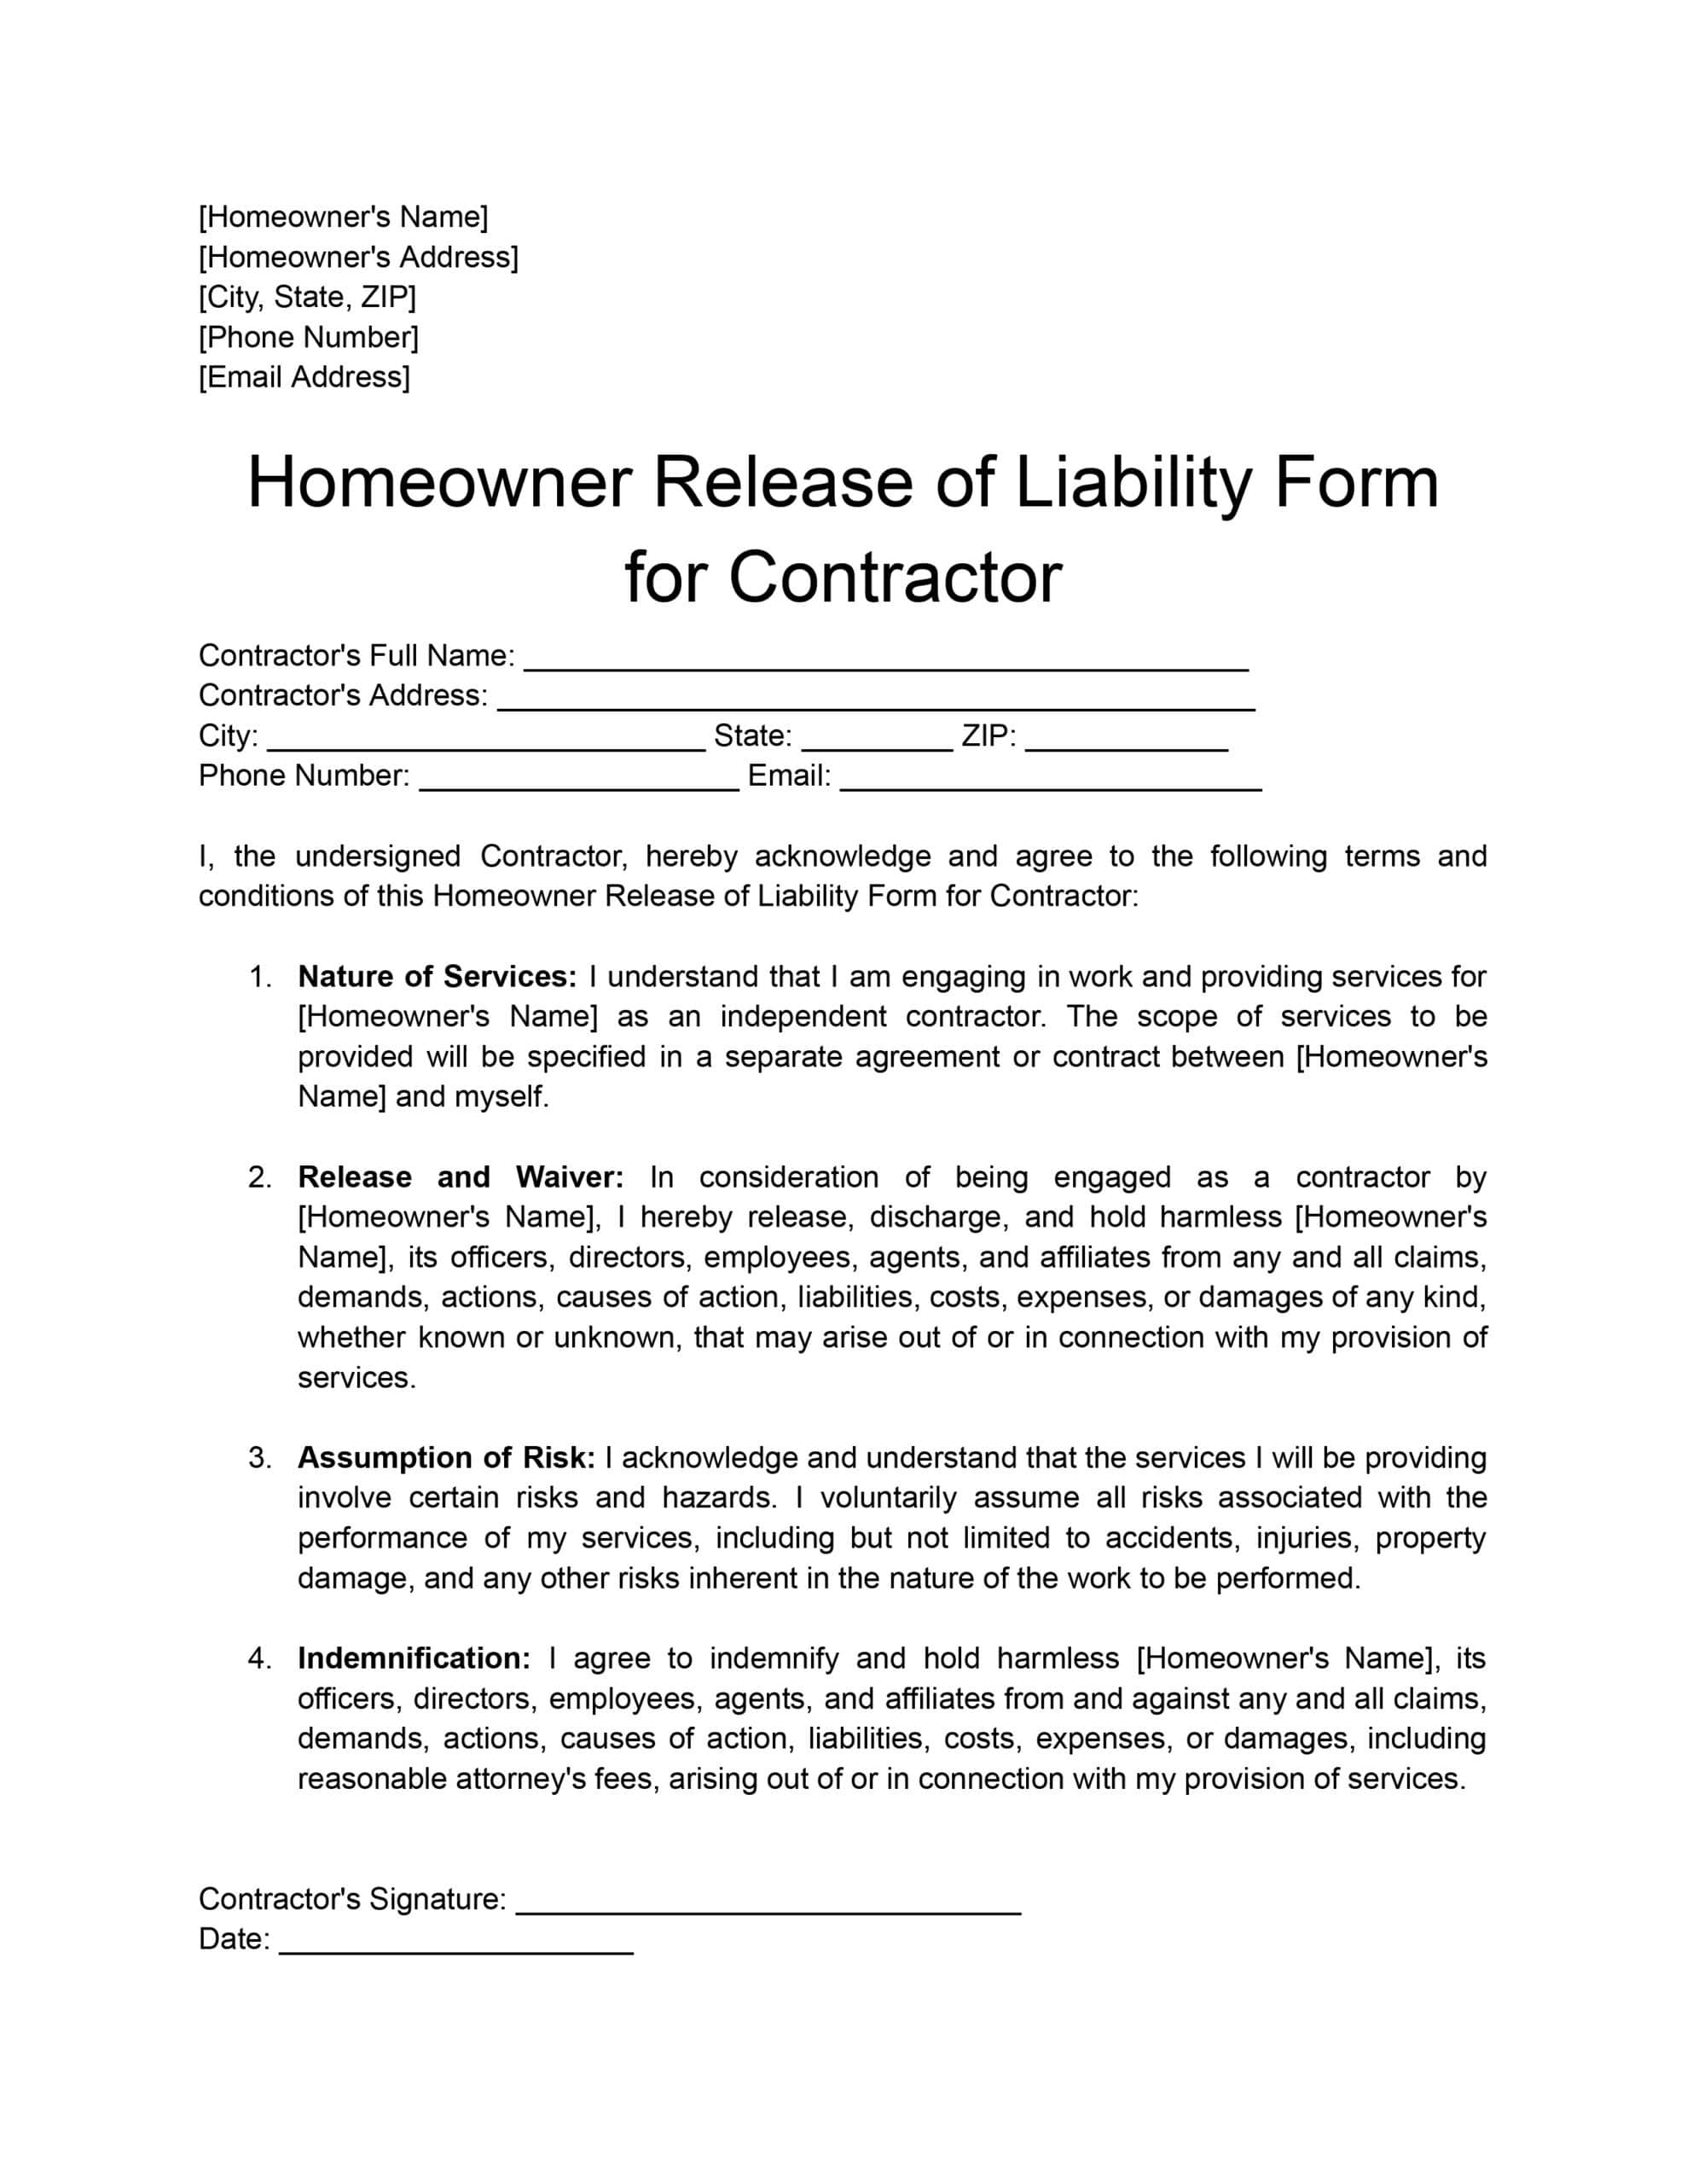 Homeowner Release of Liability Form for Contractor